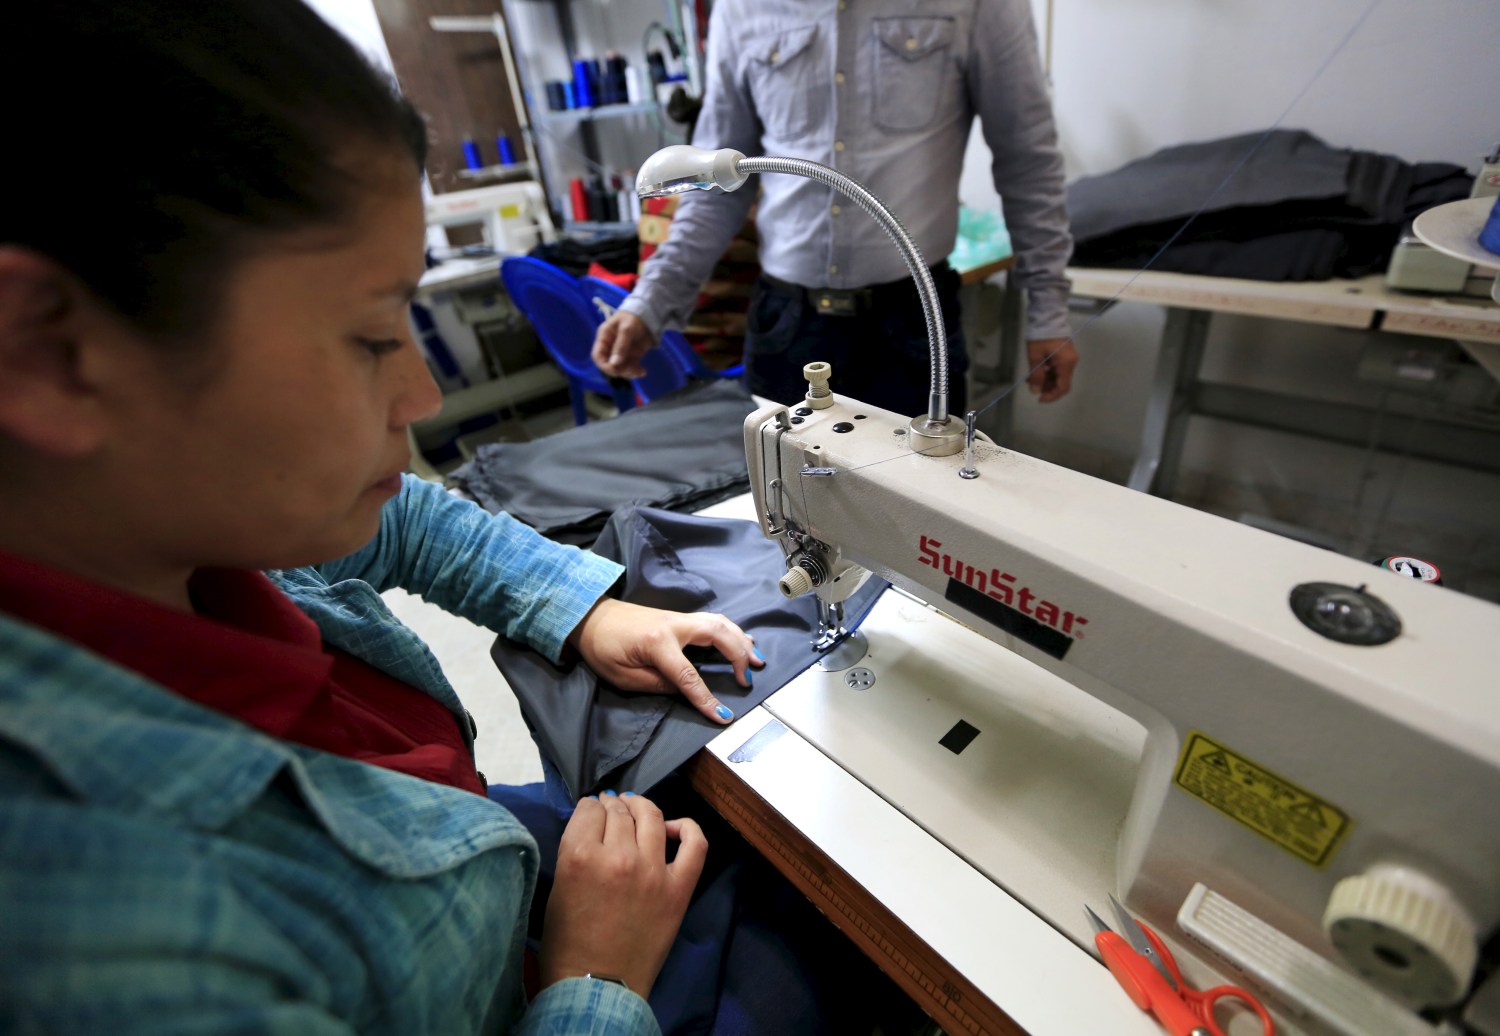 A former rebel (R), who now owns a clothing factory, oversees a worker in his workshop in Bogota in this photo taken on February 3, 2015. Fighters from the Revolutionary Armed Forces of Colombia (FARC), which is currently in peace talks with the government to end 51 years of war, face a complicated path to employment and a life away from crime as they try to reintegrate into society. Demobilized rebels are popular recruits for crime gangs and will have to overcome prejudices to become economically independent after they graduate from government reinsertion programs. Picture taken on February 3, 2015.     REUTERS/Jose Miguel Gomez - GF10000135974